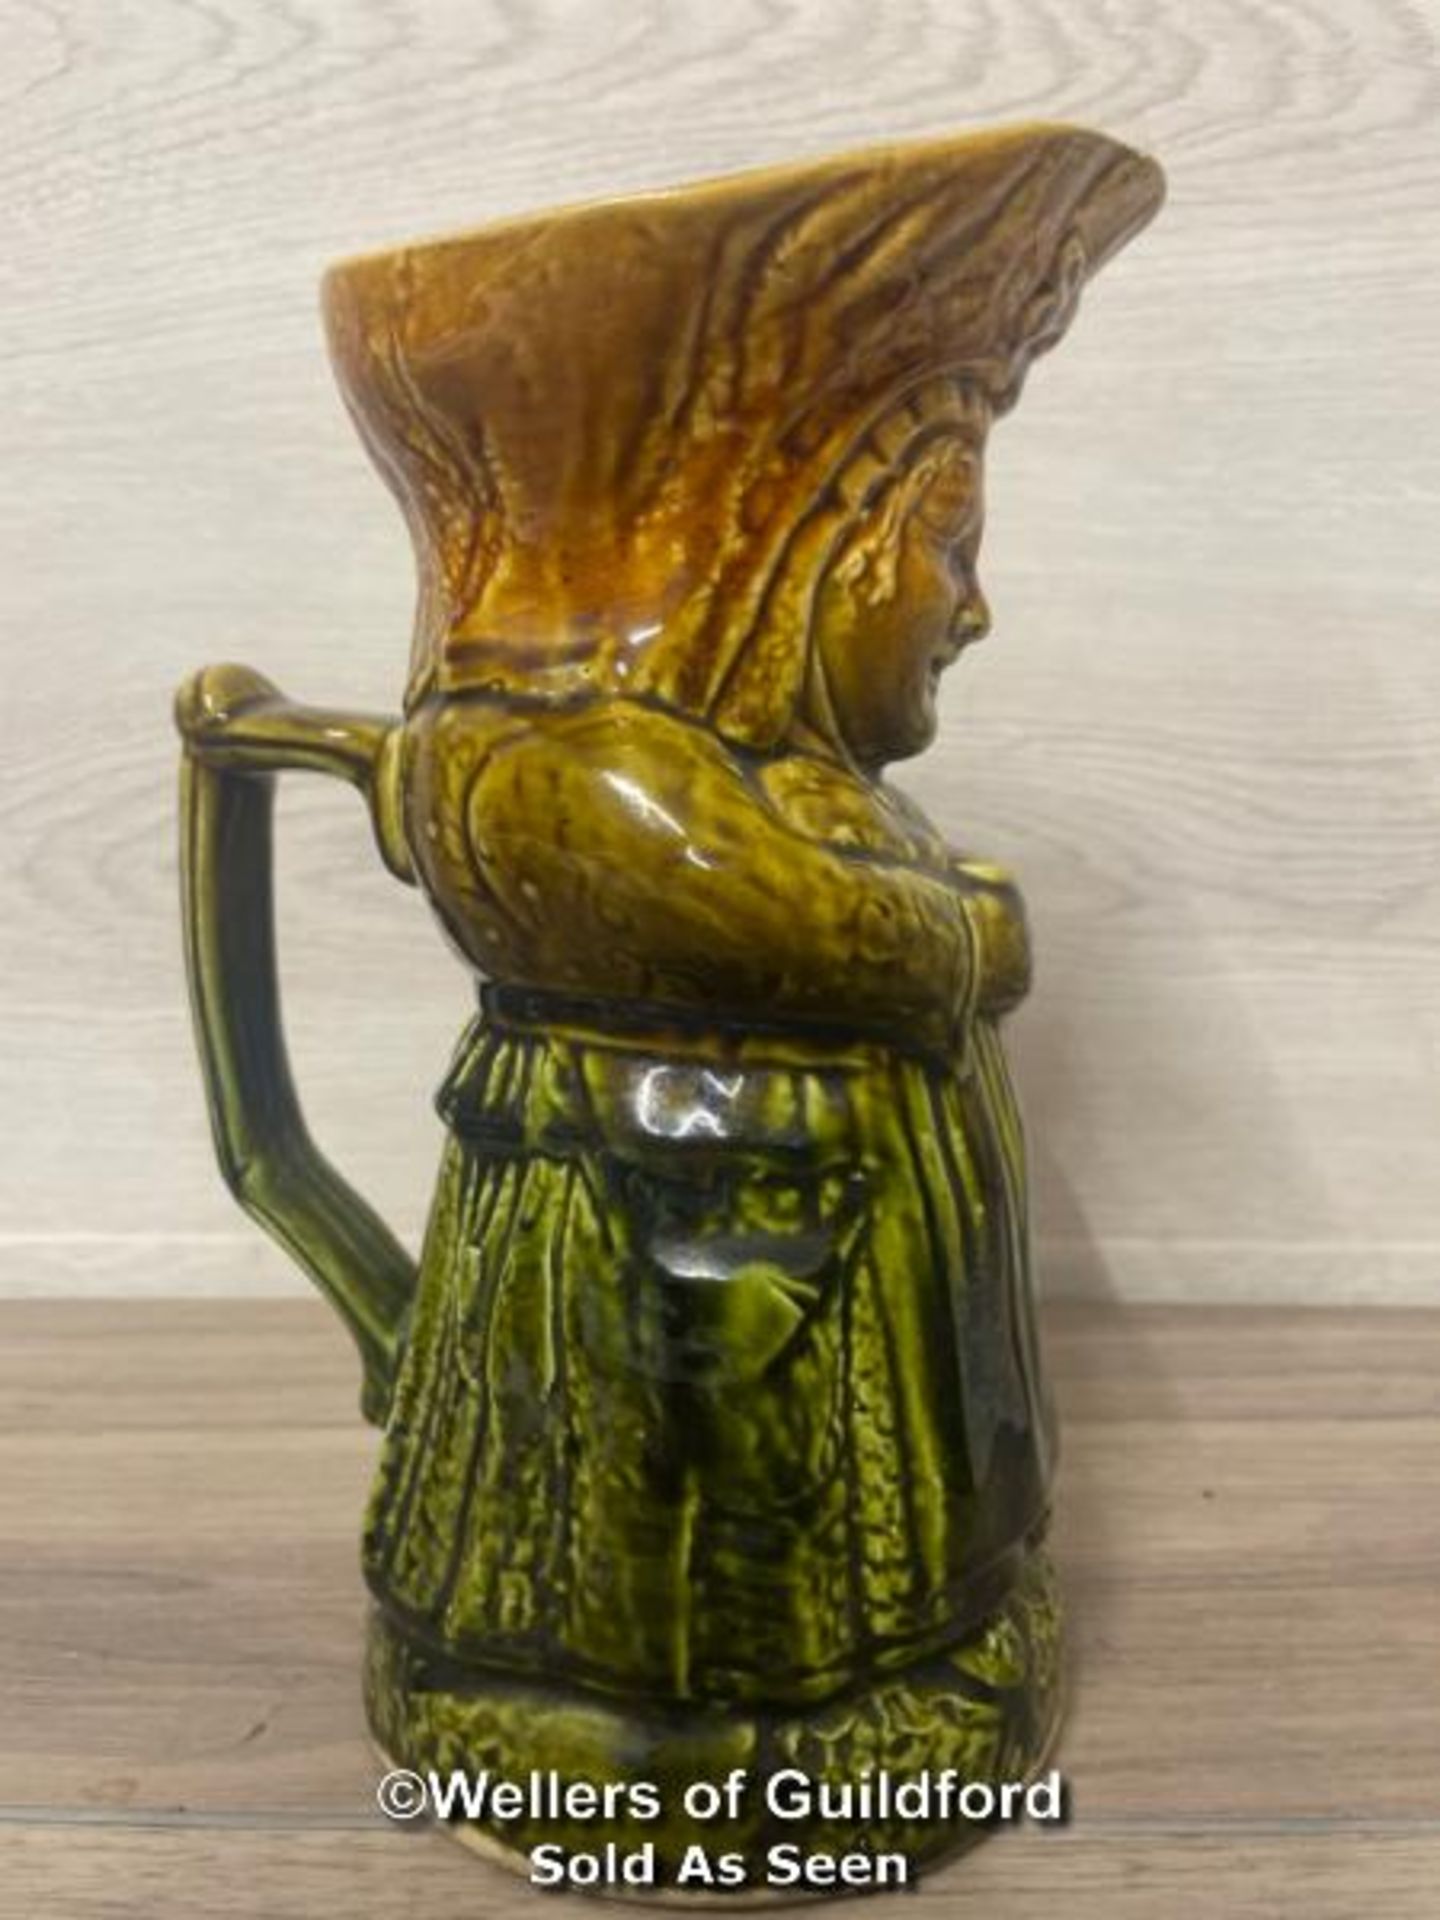 LARGE TOBY JUG VASE OF A LADY WITH IN GREEN SKIRT, 9" HIGH - Image 3 of 4